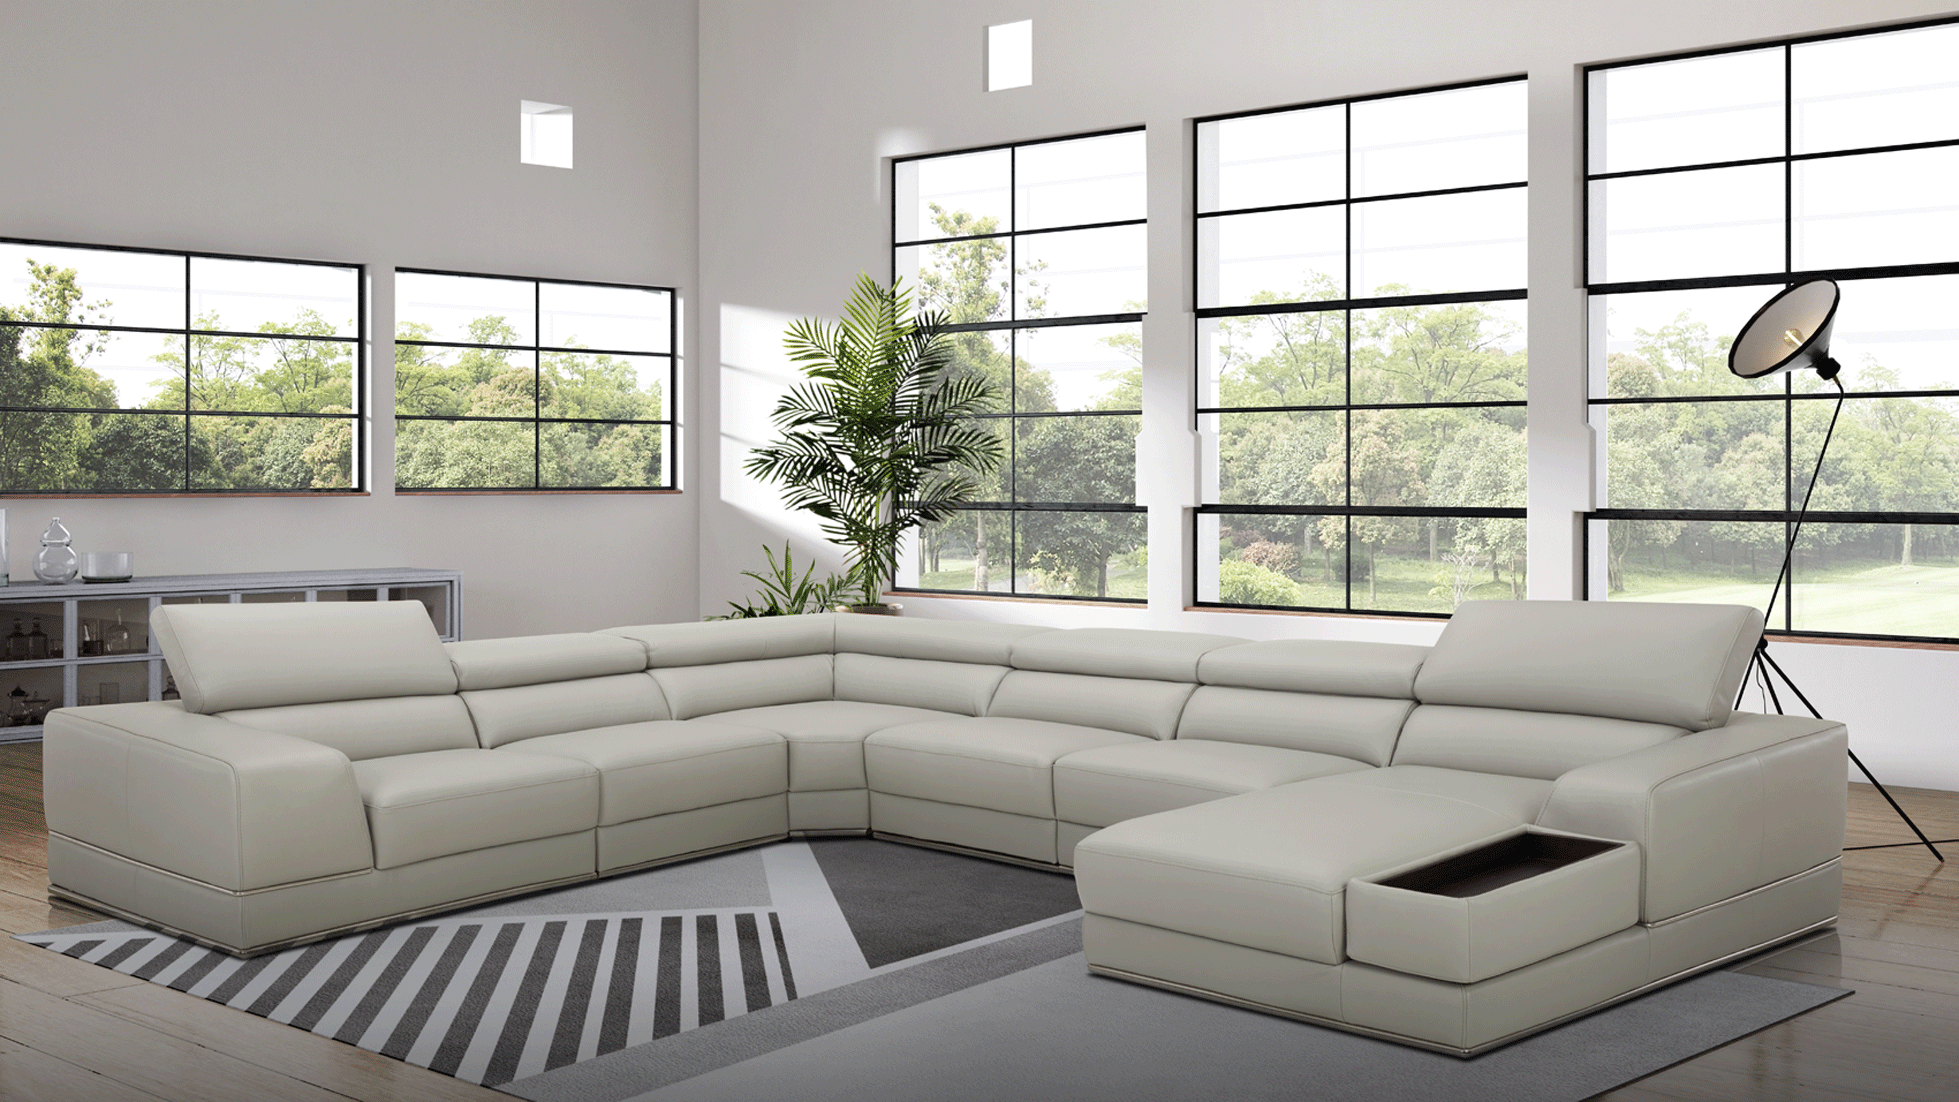 Living Room Furniture Sofas Loveseats and Chairs 1576 Sectional Right by Kuka